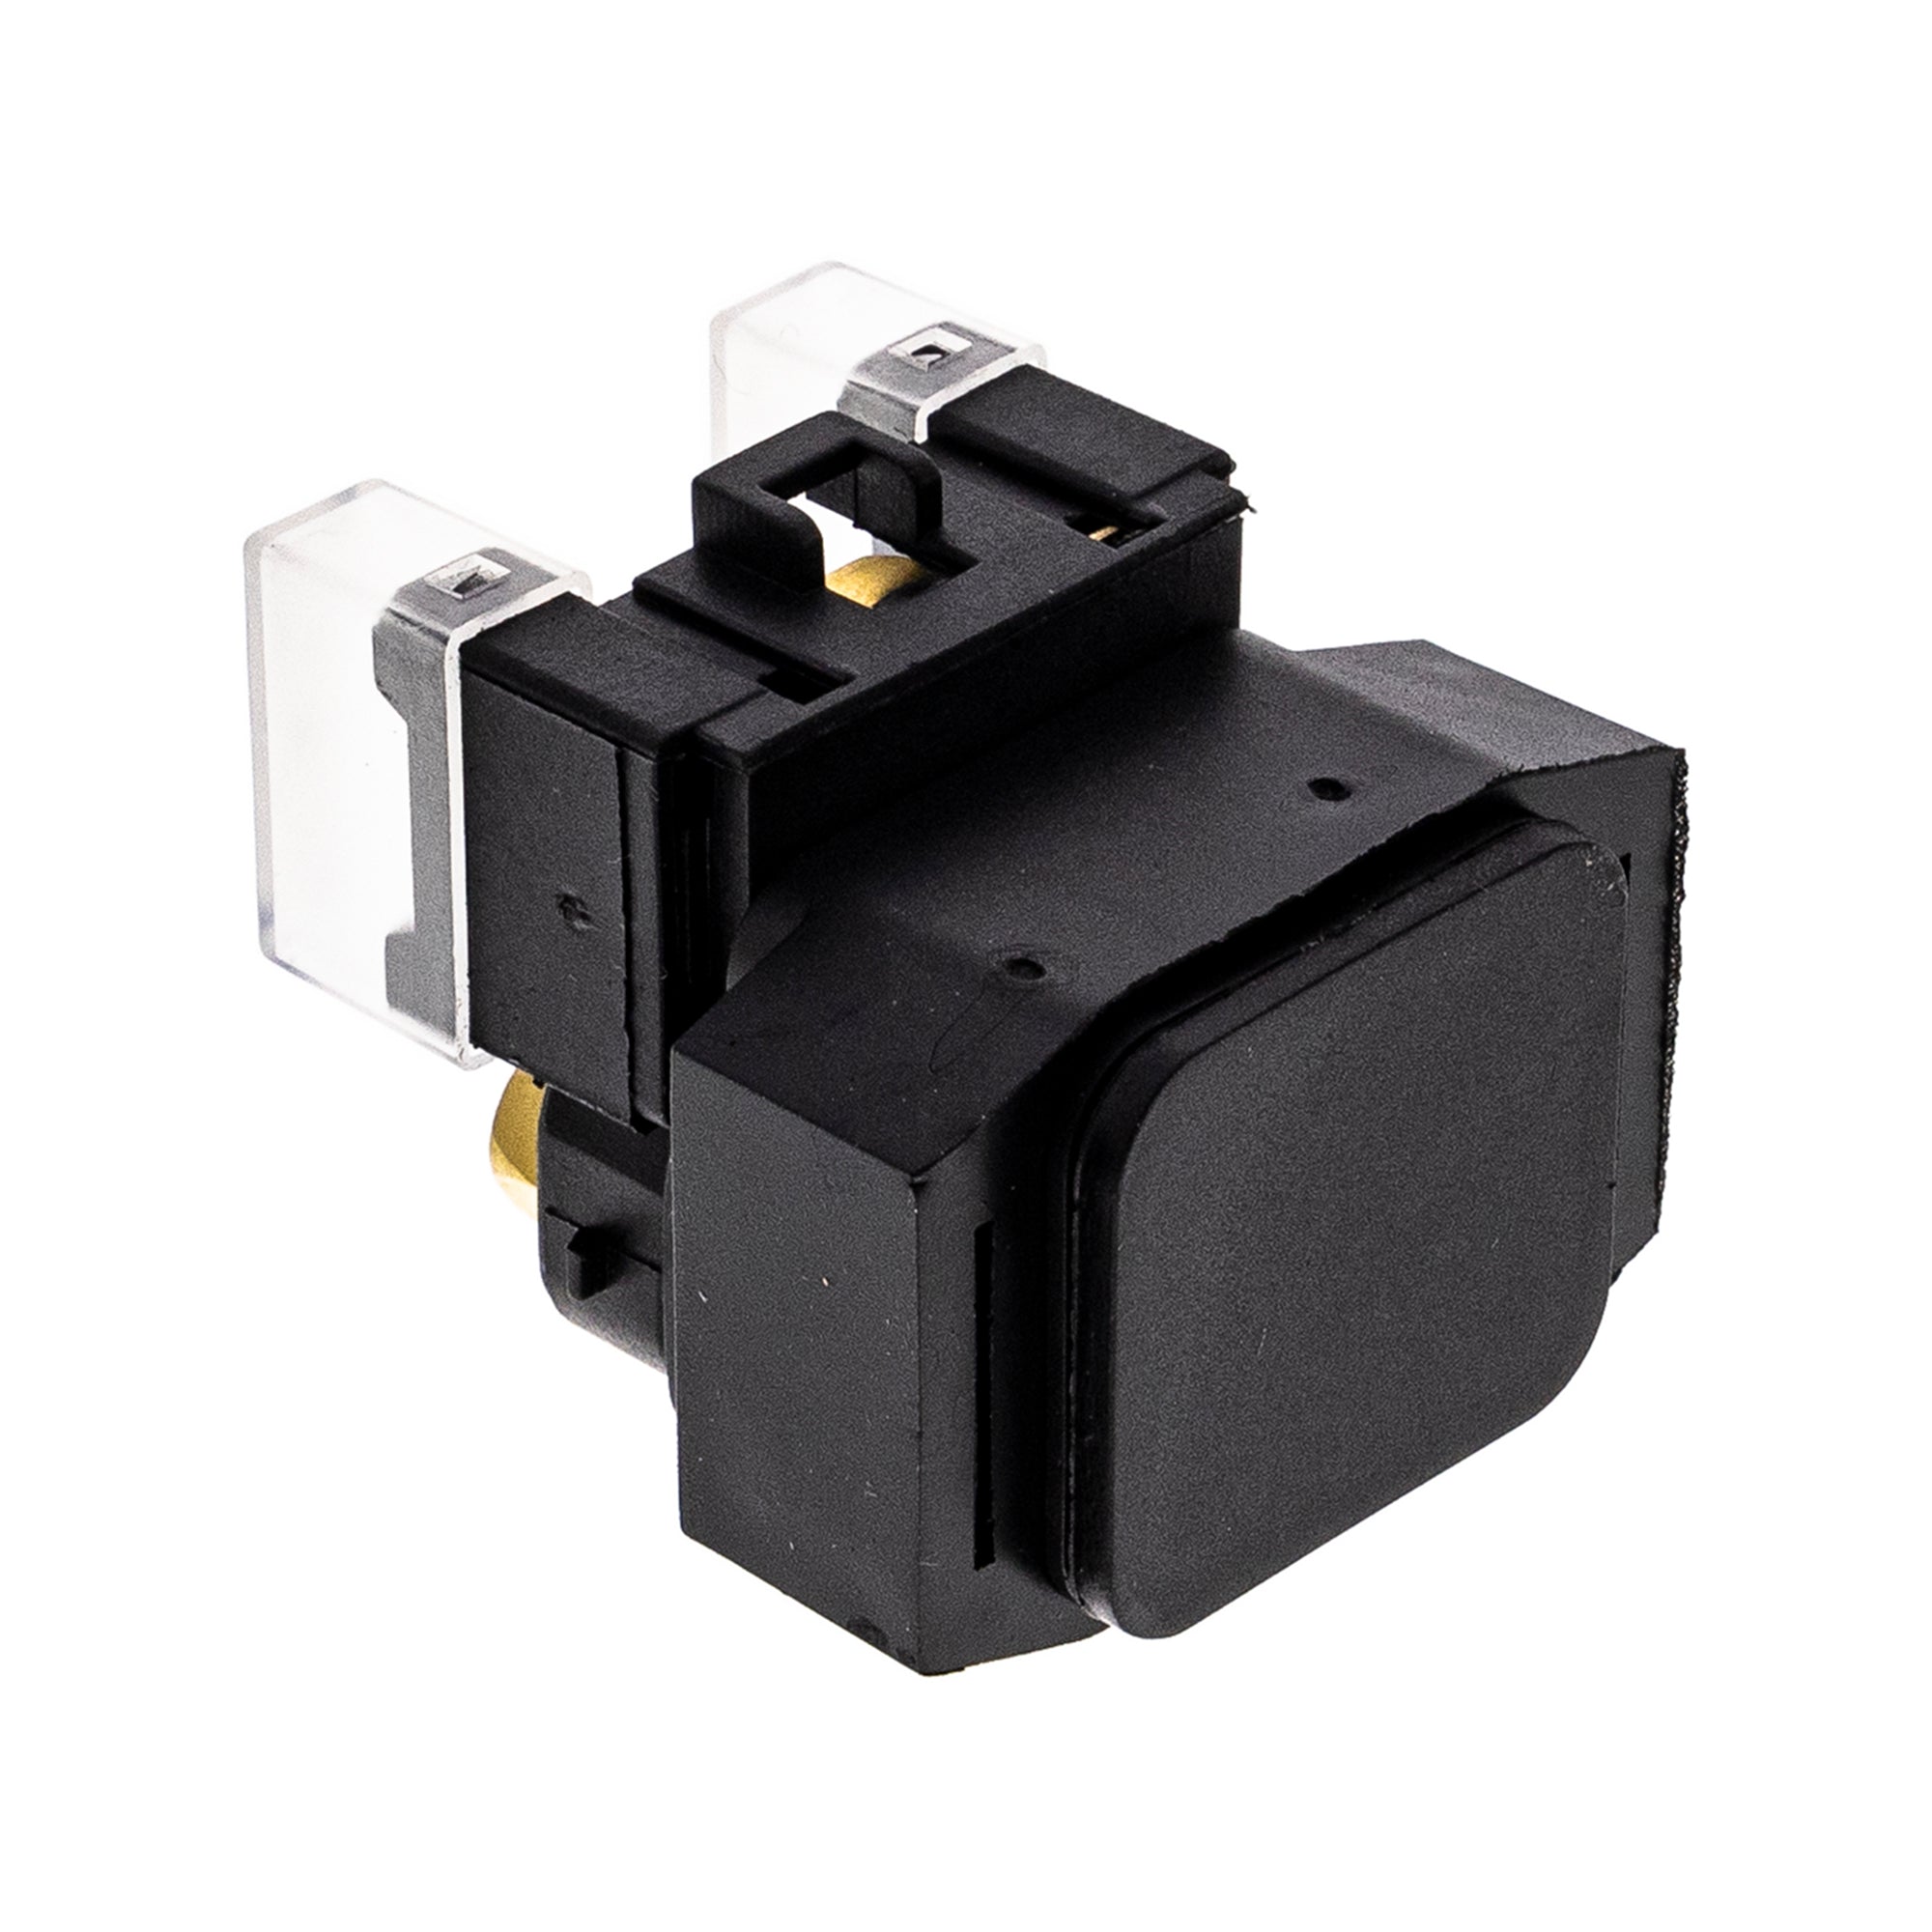 Starter Solenoid Relay Switch For Yamaha 5HH-81940-02-00 5HH-81940-01-00 5HH-81940-00-00